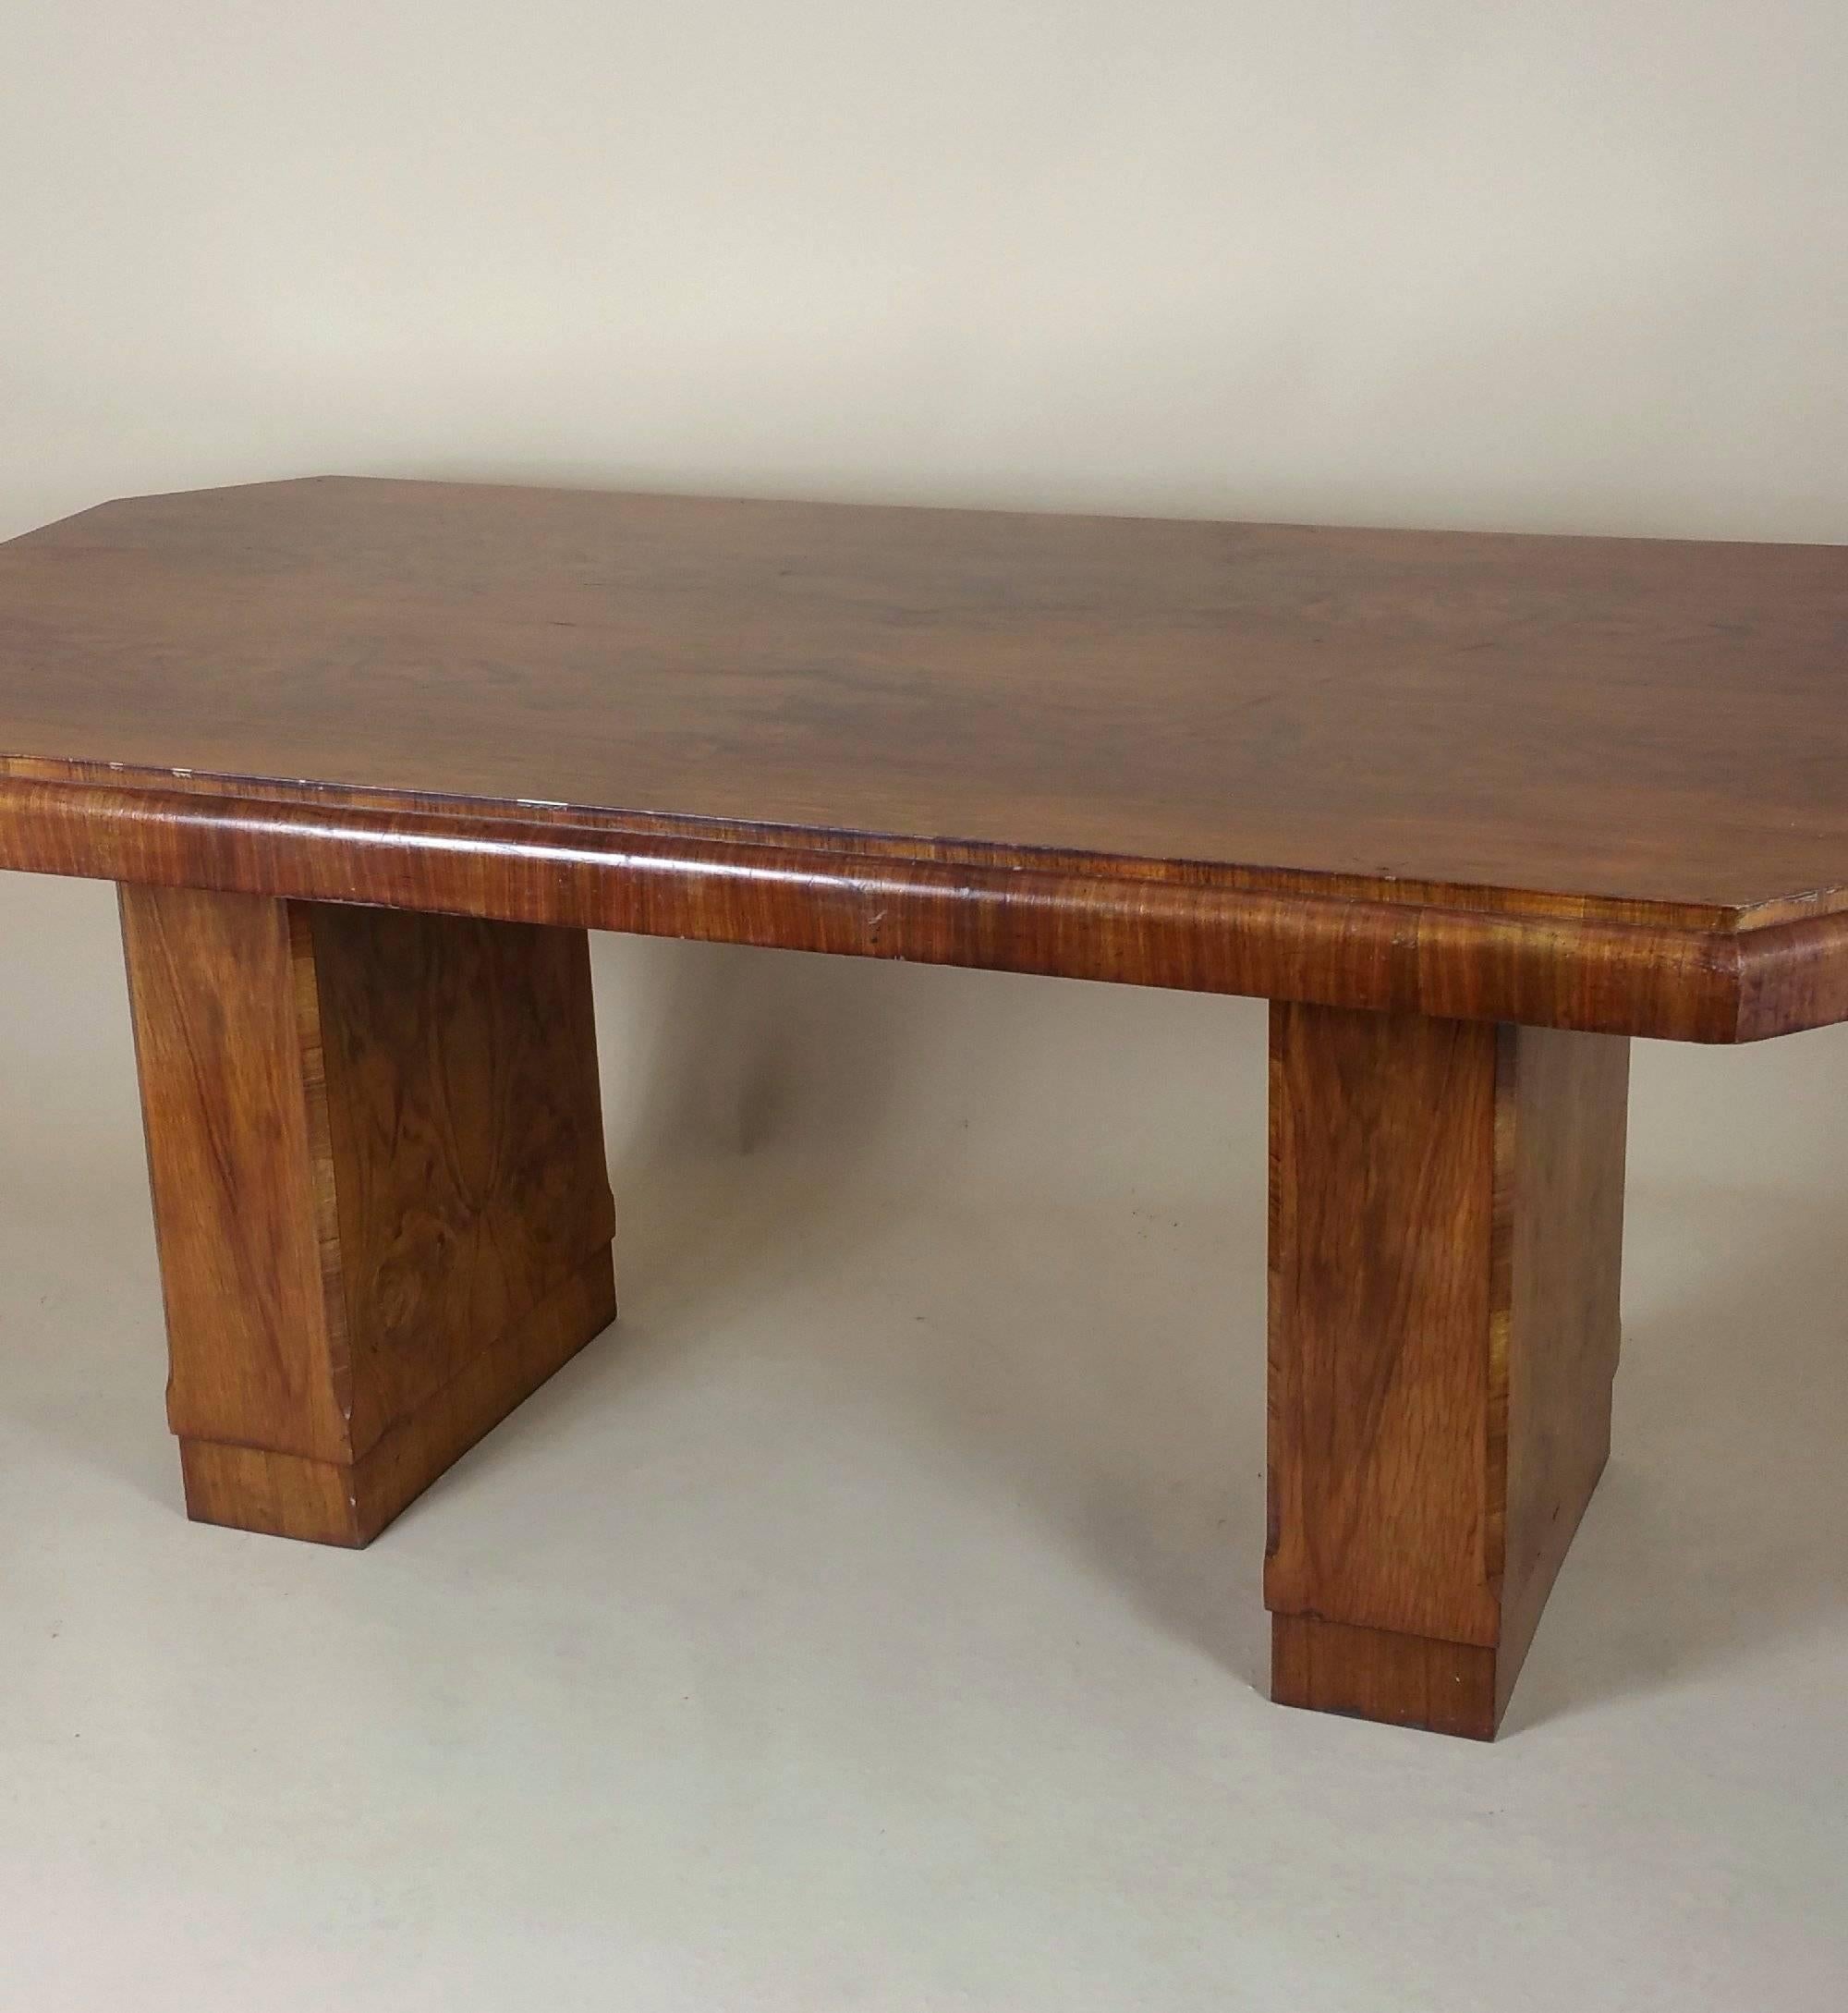 This beautiful and substantial Art Deco dining table showcases a Classic style of the period. The table has an oblong hexagonal shaped top and stands on twin slender pedestal supports. The table measures 74 in – 188 cm wide, 38 in – 96.5 cm deep and